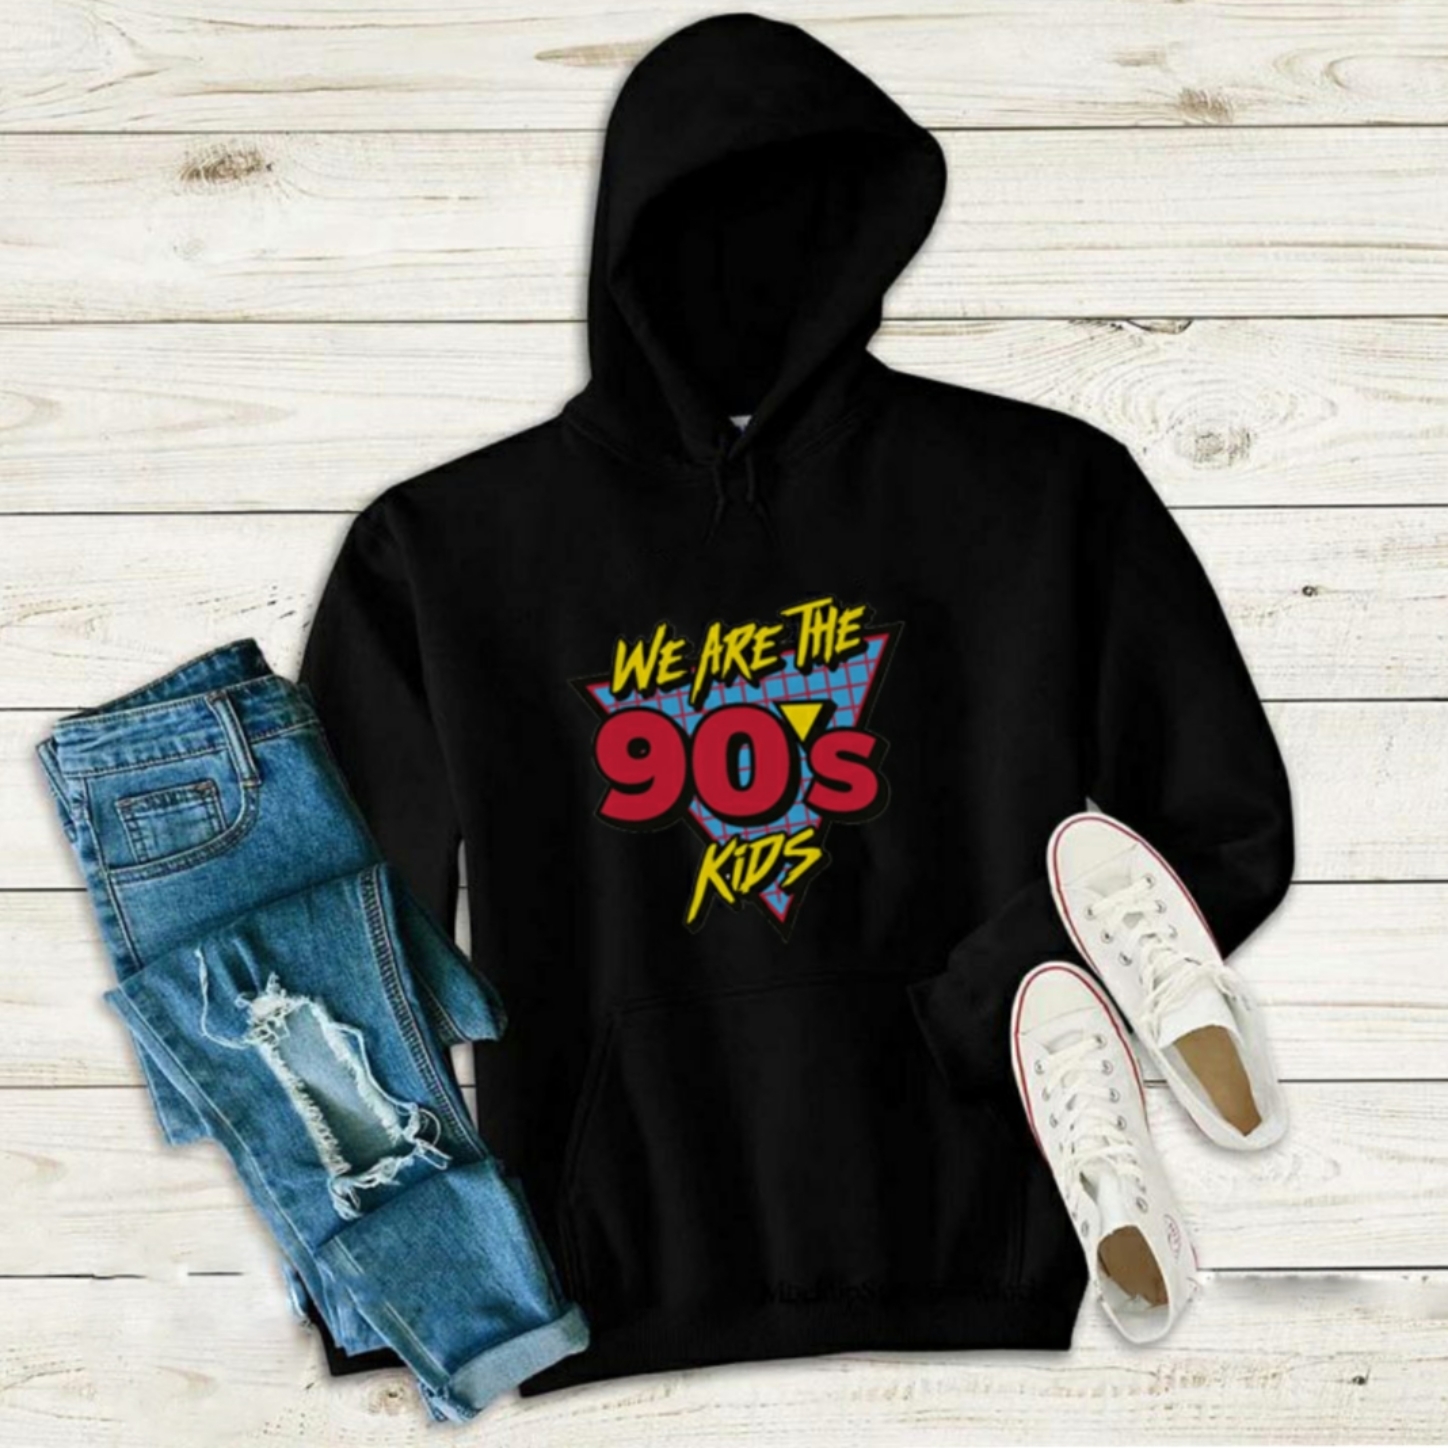 We are the 90s kids Hoodie